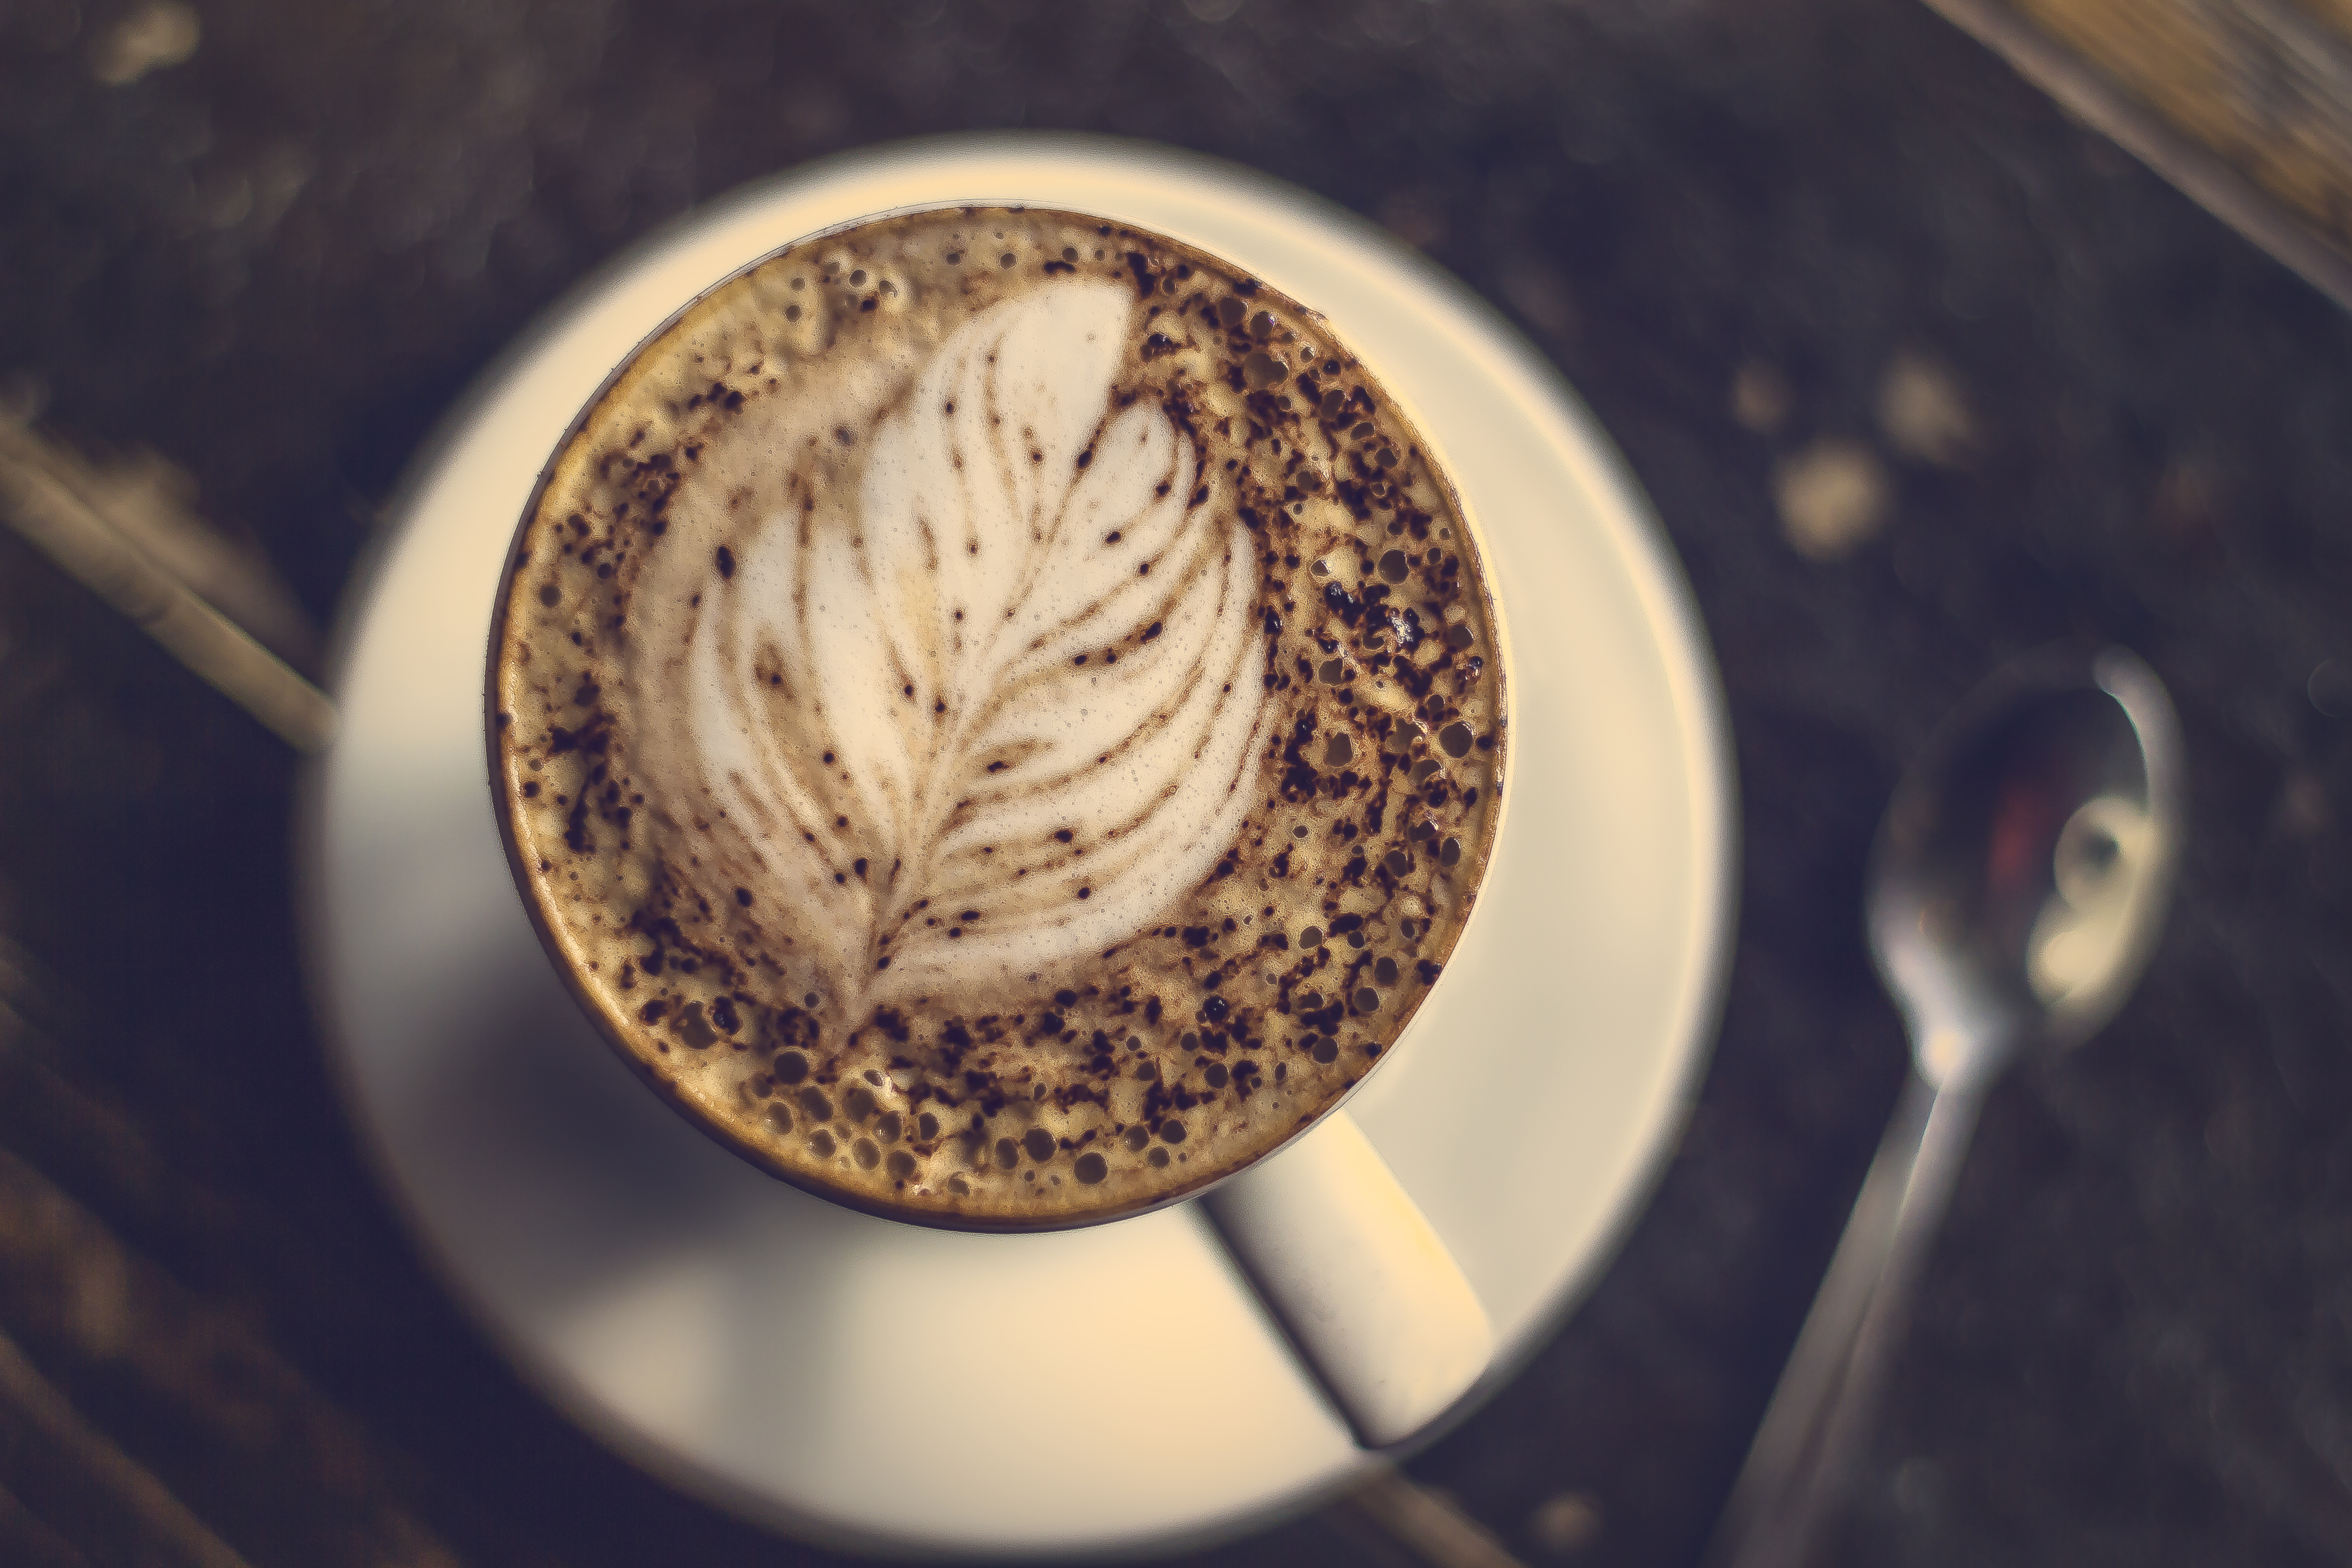 Free Images : latte, cappuccino, food, beverage, drink, coffee cup ...